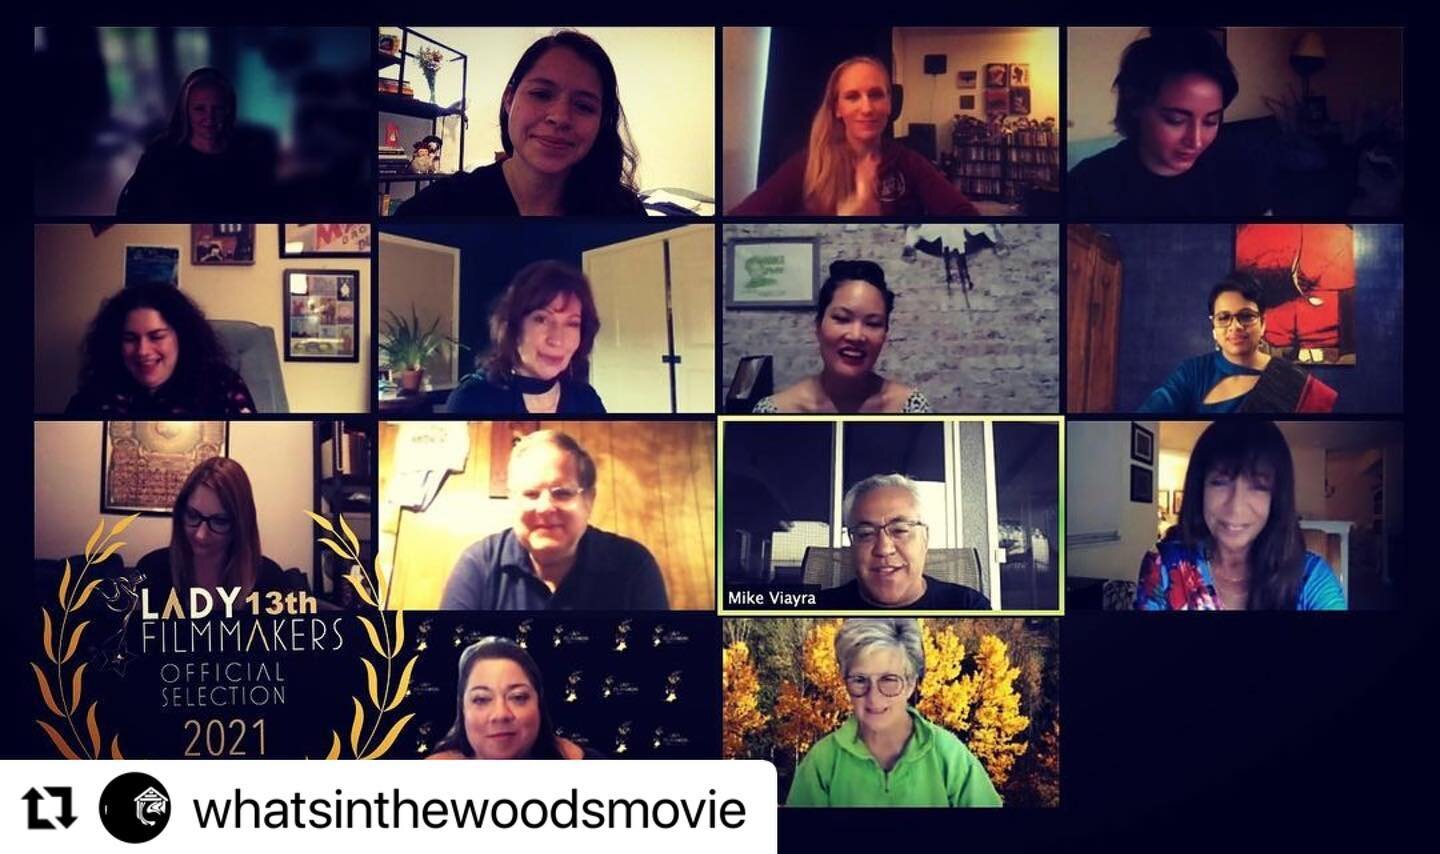 #Repost @whatsinthewoodsmovie with @make_repost
・・・
#happyfemalefilmmakerfriday 💃🏻🎞💃🏻!!!!

We are feeling so lucky and grateful to have gotten to spend time with some really inspiring, creative, and clever women through the 13th Annual @ladyfilm